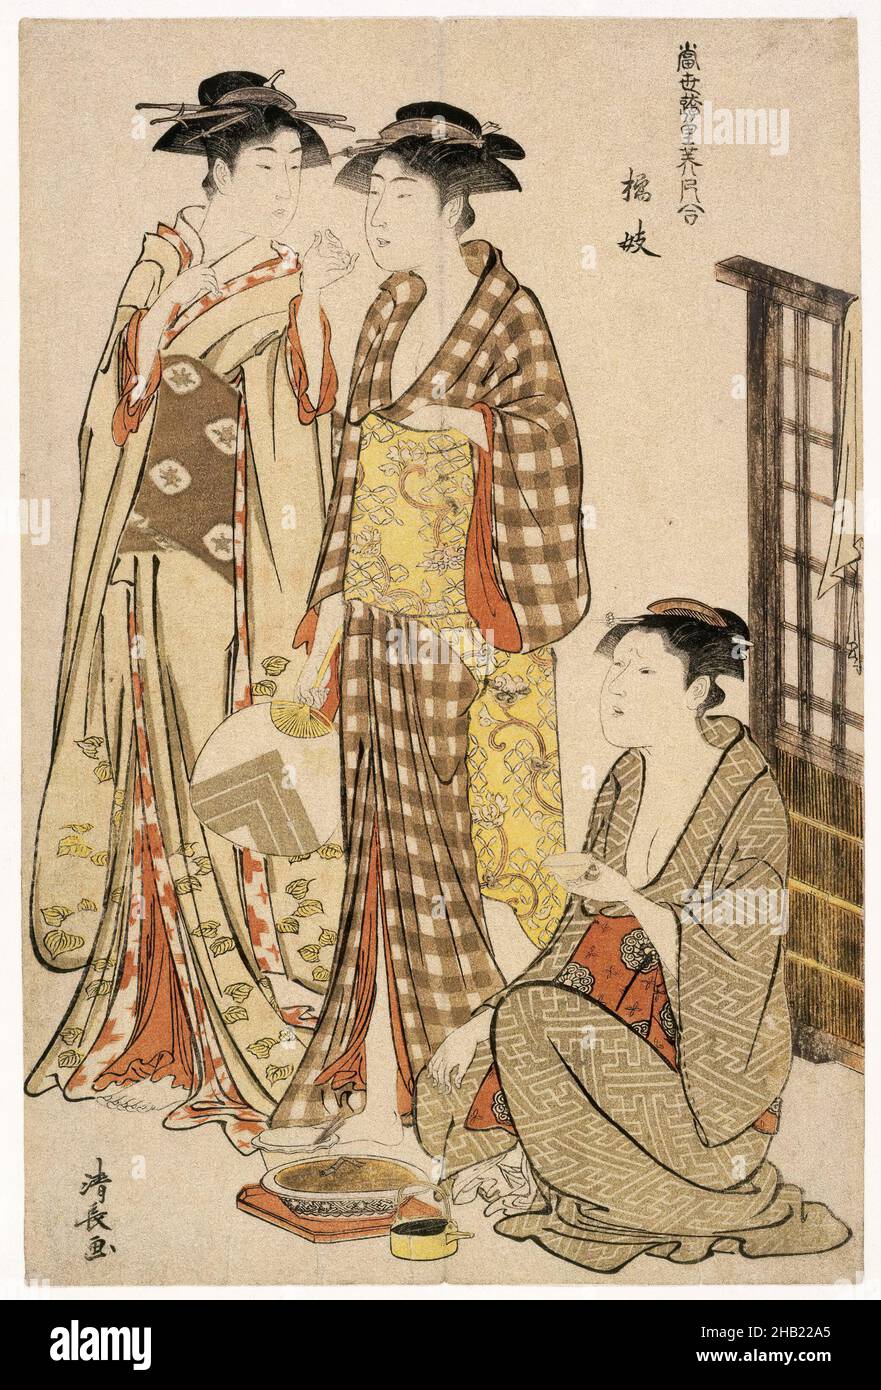 Geisha of Tachibana-chō, from the series Contest of Contemporary Beauties of the Pleasure Quarters, Torii Kiyonaga, Japanese, 1752-1815, Color woodblock print on paper, Japan, 1782, Edo Period, sheet: 15 x 10 in., 38.1 x 25.4 cm, Bijin, Bijinga, Edo Period, Japan, Japanese, Kimono, Women Stock Photo